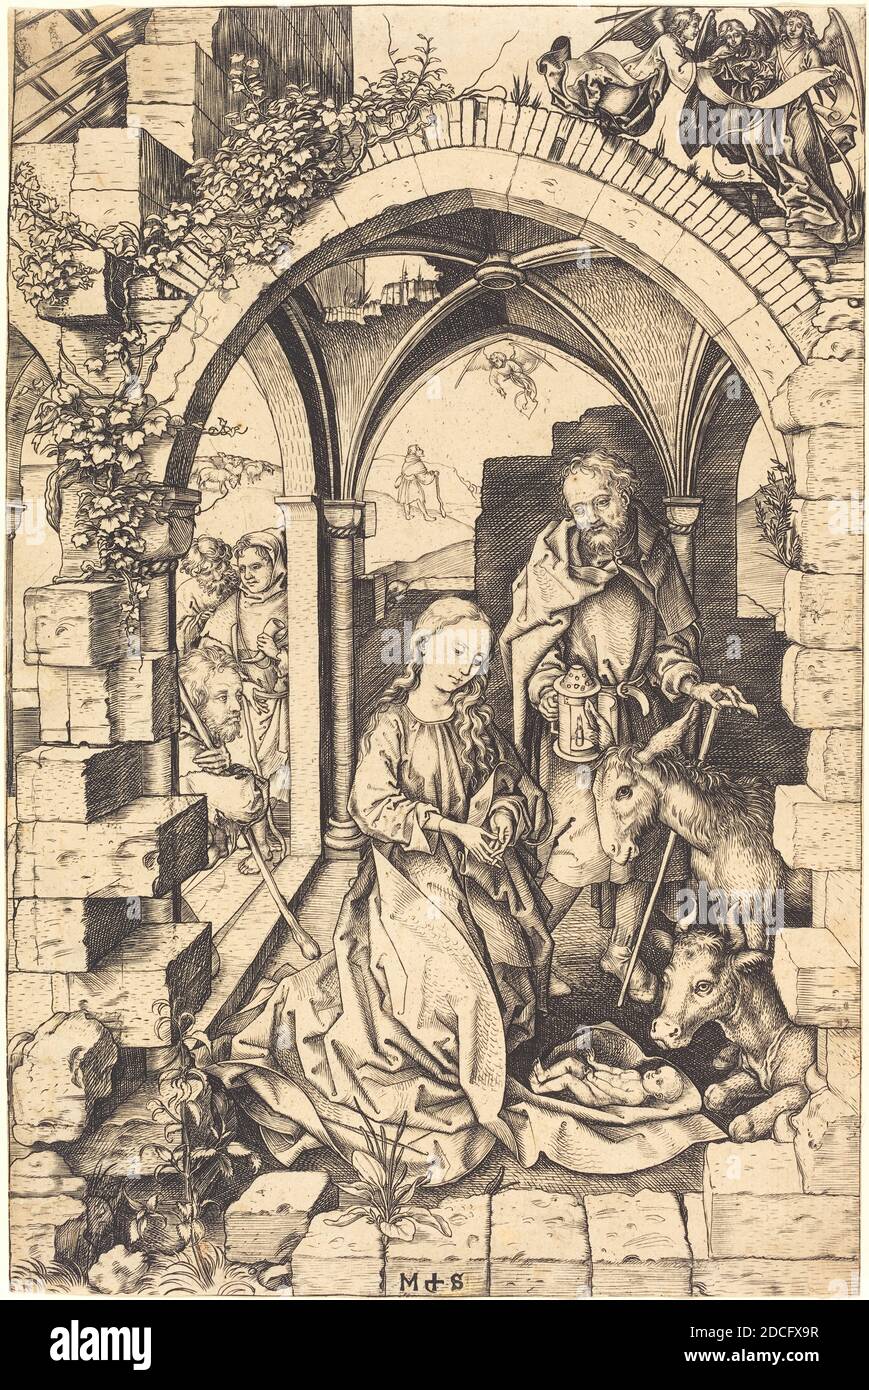 Martin Schongauer, (artist), German, c. 1450 - 1491, The Nativity, Life of the Virgin, (series), c. 1470/1475, engraving on laid paper, sheet (trimmed to plate mark): 25.4 x 16.8 cm (10 x 6 5/8 in Stock Photo